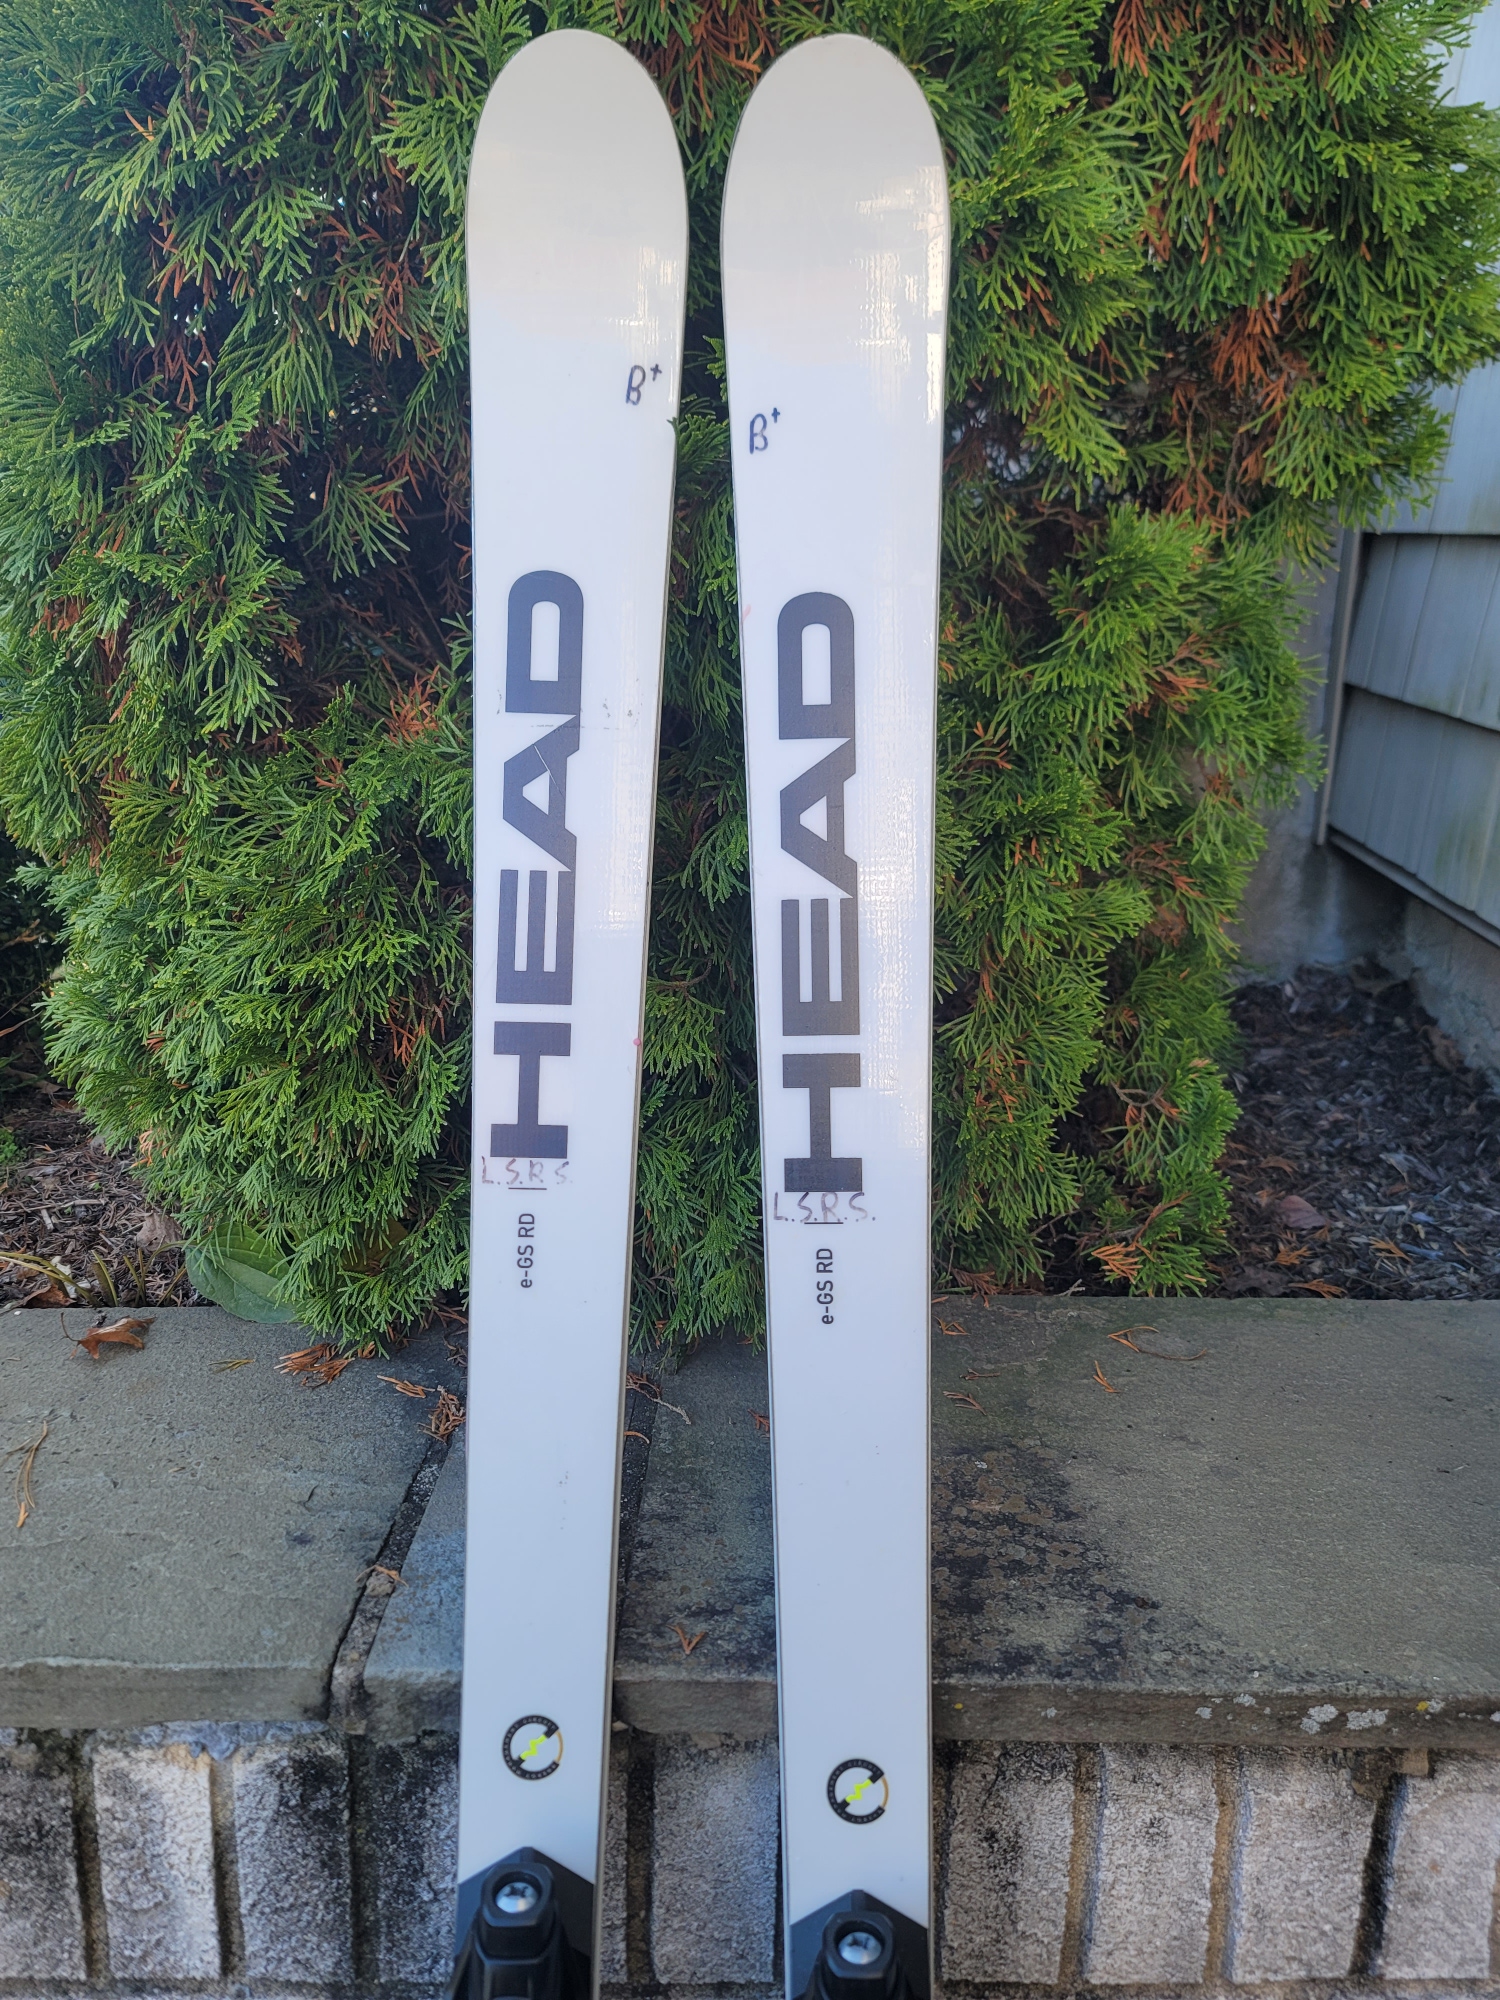 HEAD 188 cm Racing World Cup Rebels i.GS RD Skis With Bindings Max Din 16 and Binding Lifters